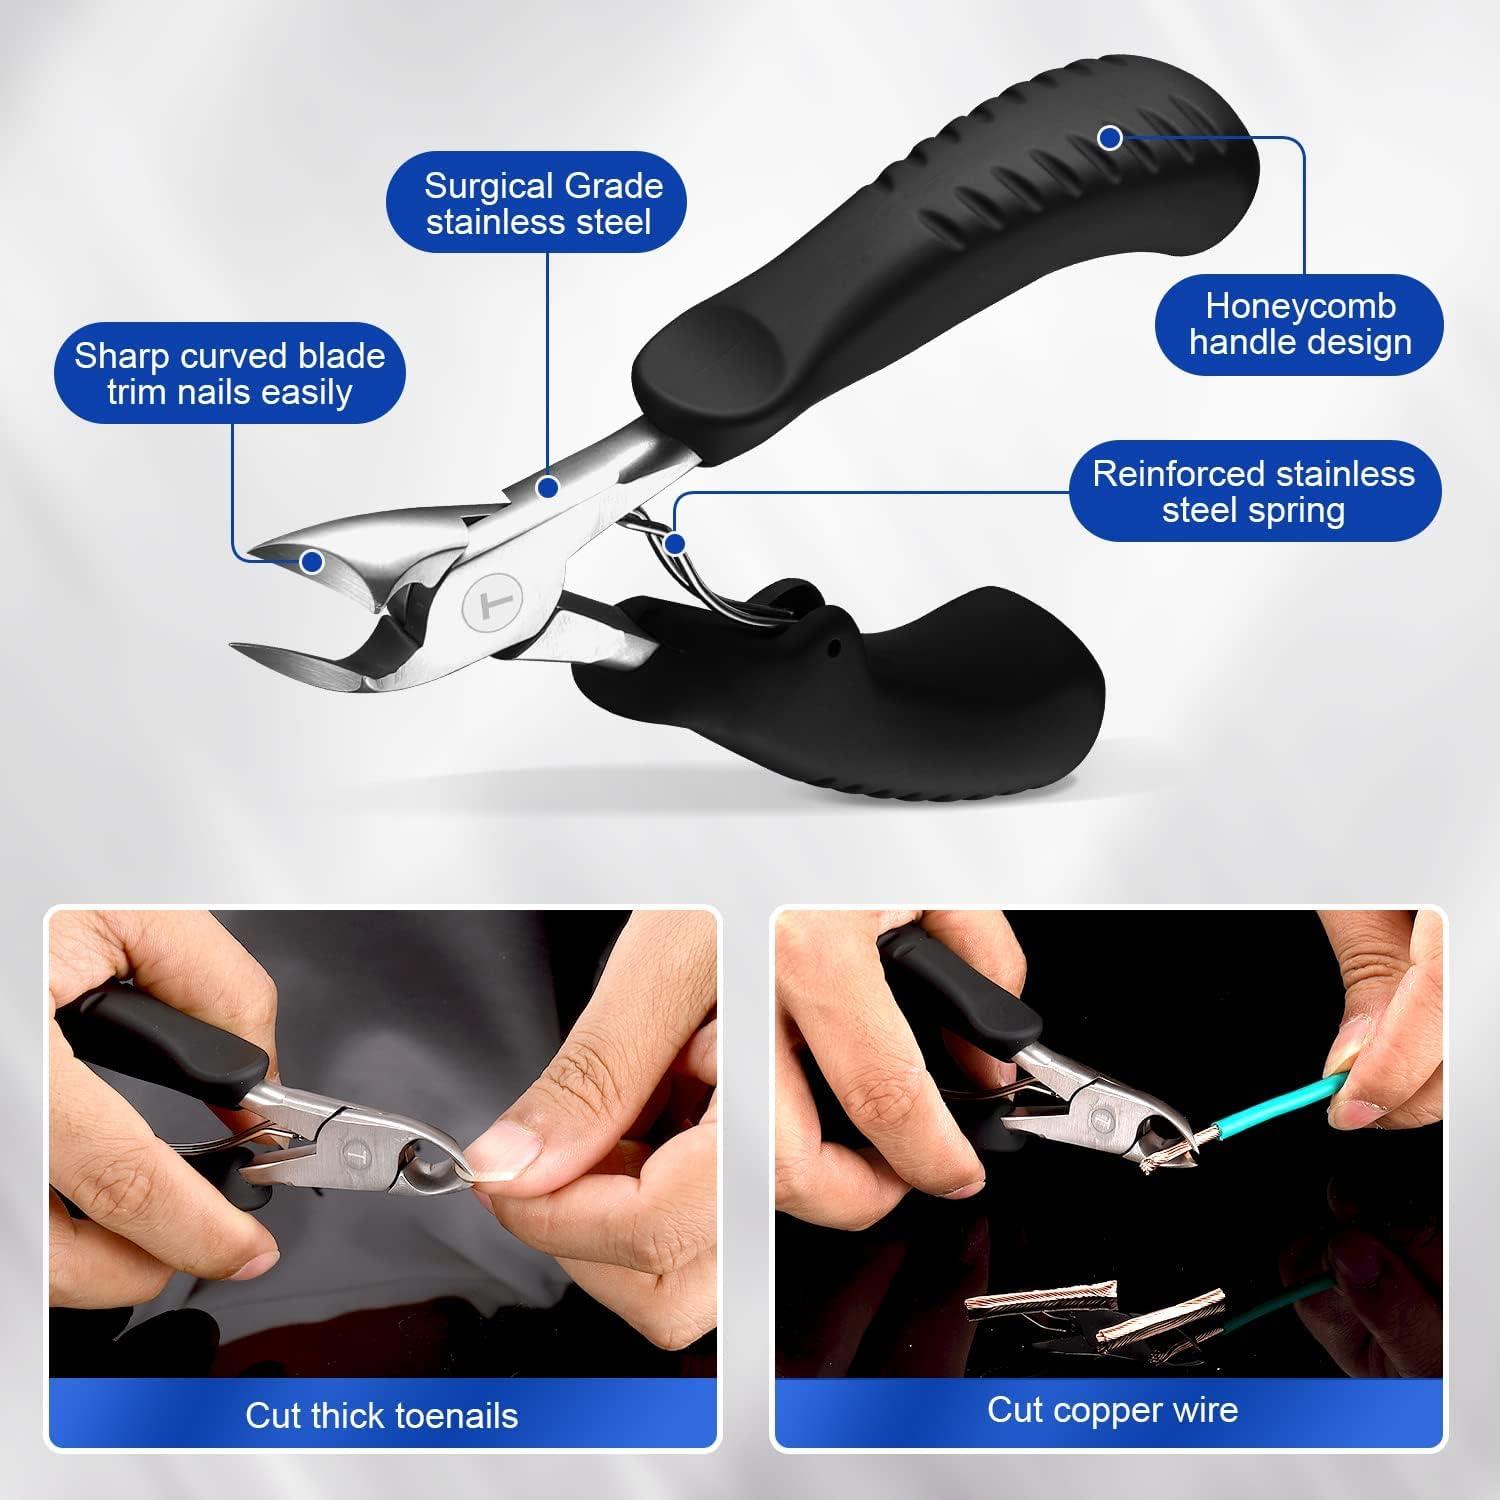 Toenail Clippers, Medical Grade Toe Nail Trimmer, Nail Clippers for Thick  Nails or Ingrown Toenail Tool, Stainless Steel Sharp Pedicure Toe Nail  Clippers Adult, with Easy-to-Grip Rubber Handle.